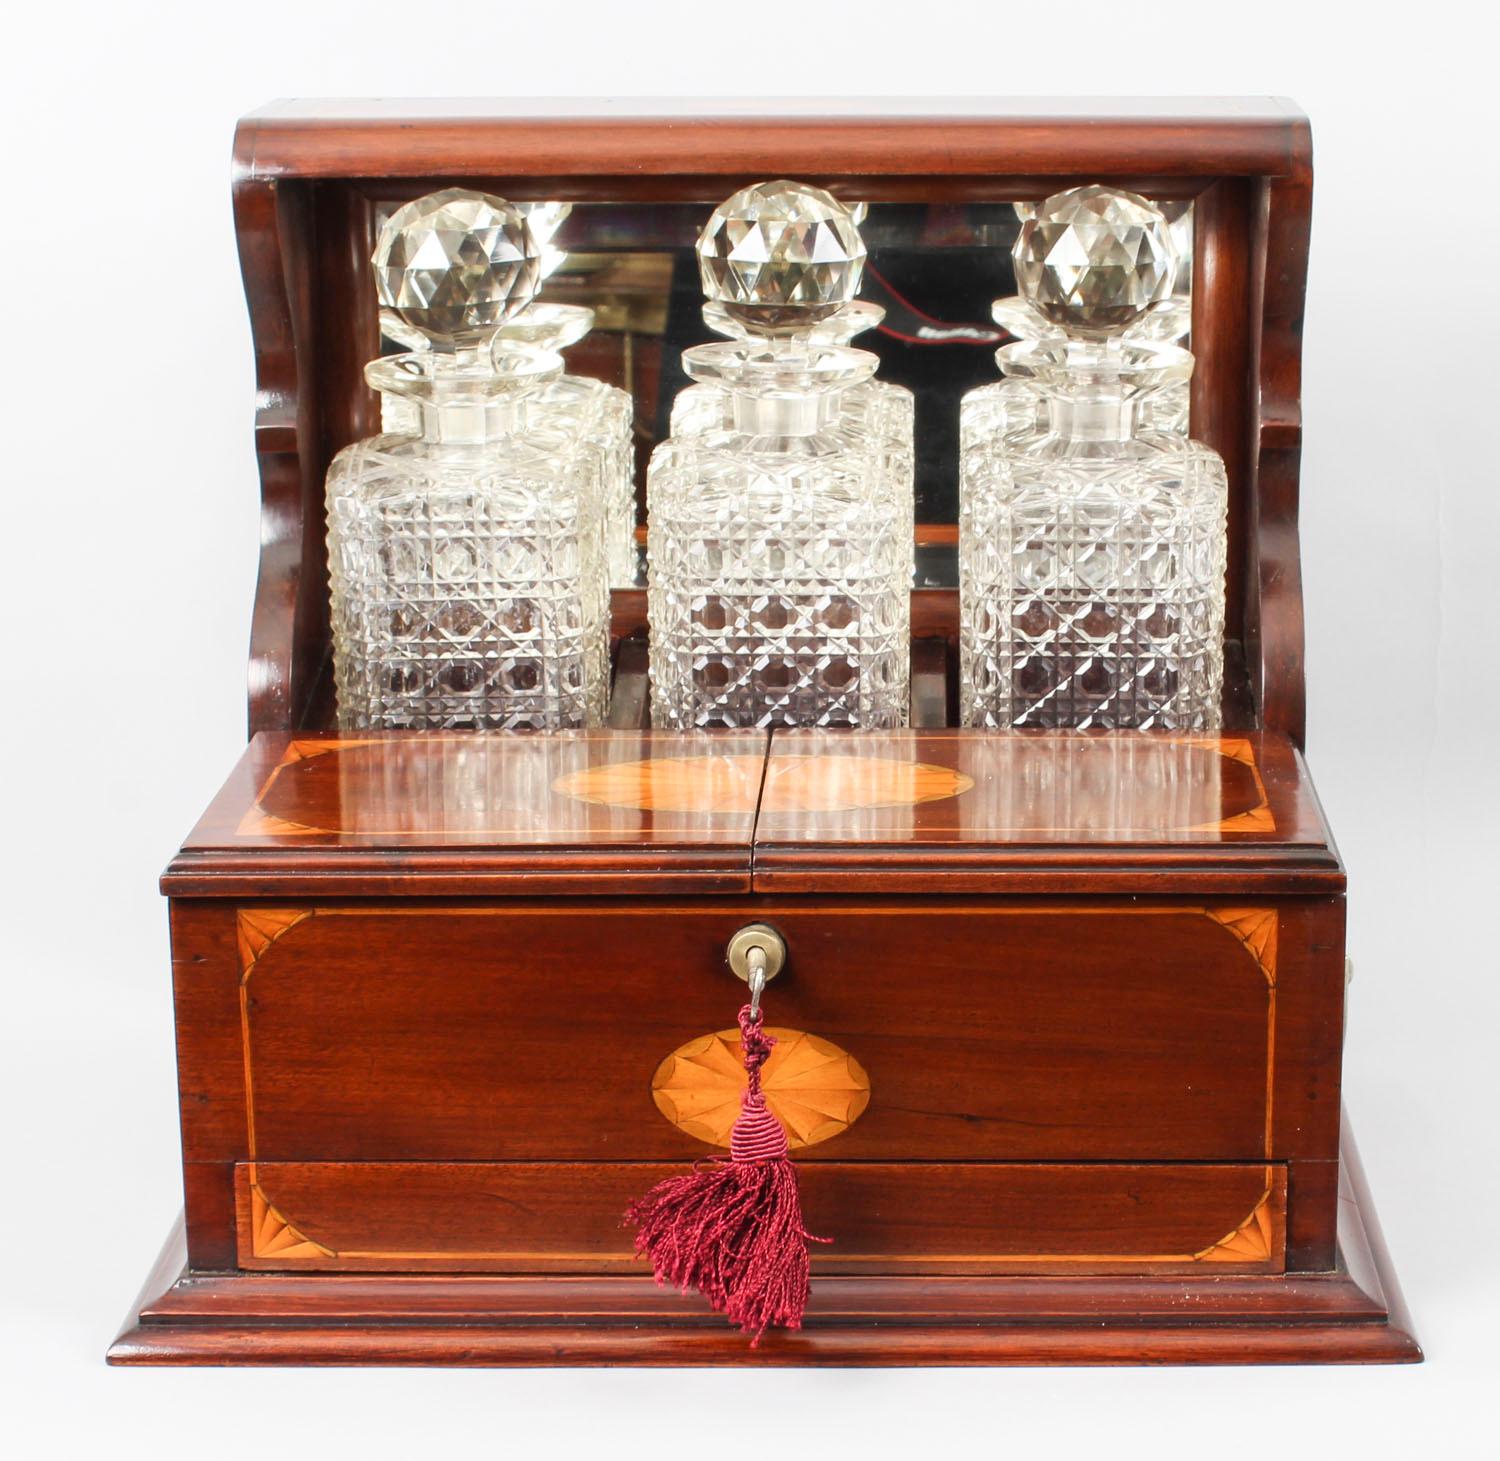 This is a superb antique Victorian mahogany cased three decanter Tantalus with decorative inlaid decoration, circa 1870 in date.

It was skillfully crafted in mahogany with beautiful shell and line inlaid decoration and stylish silver plated